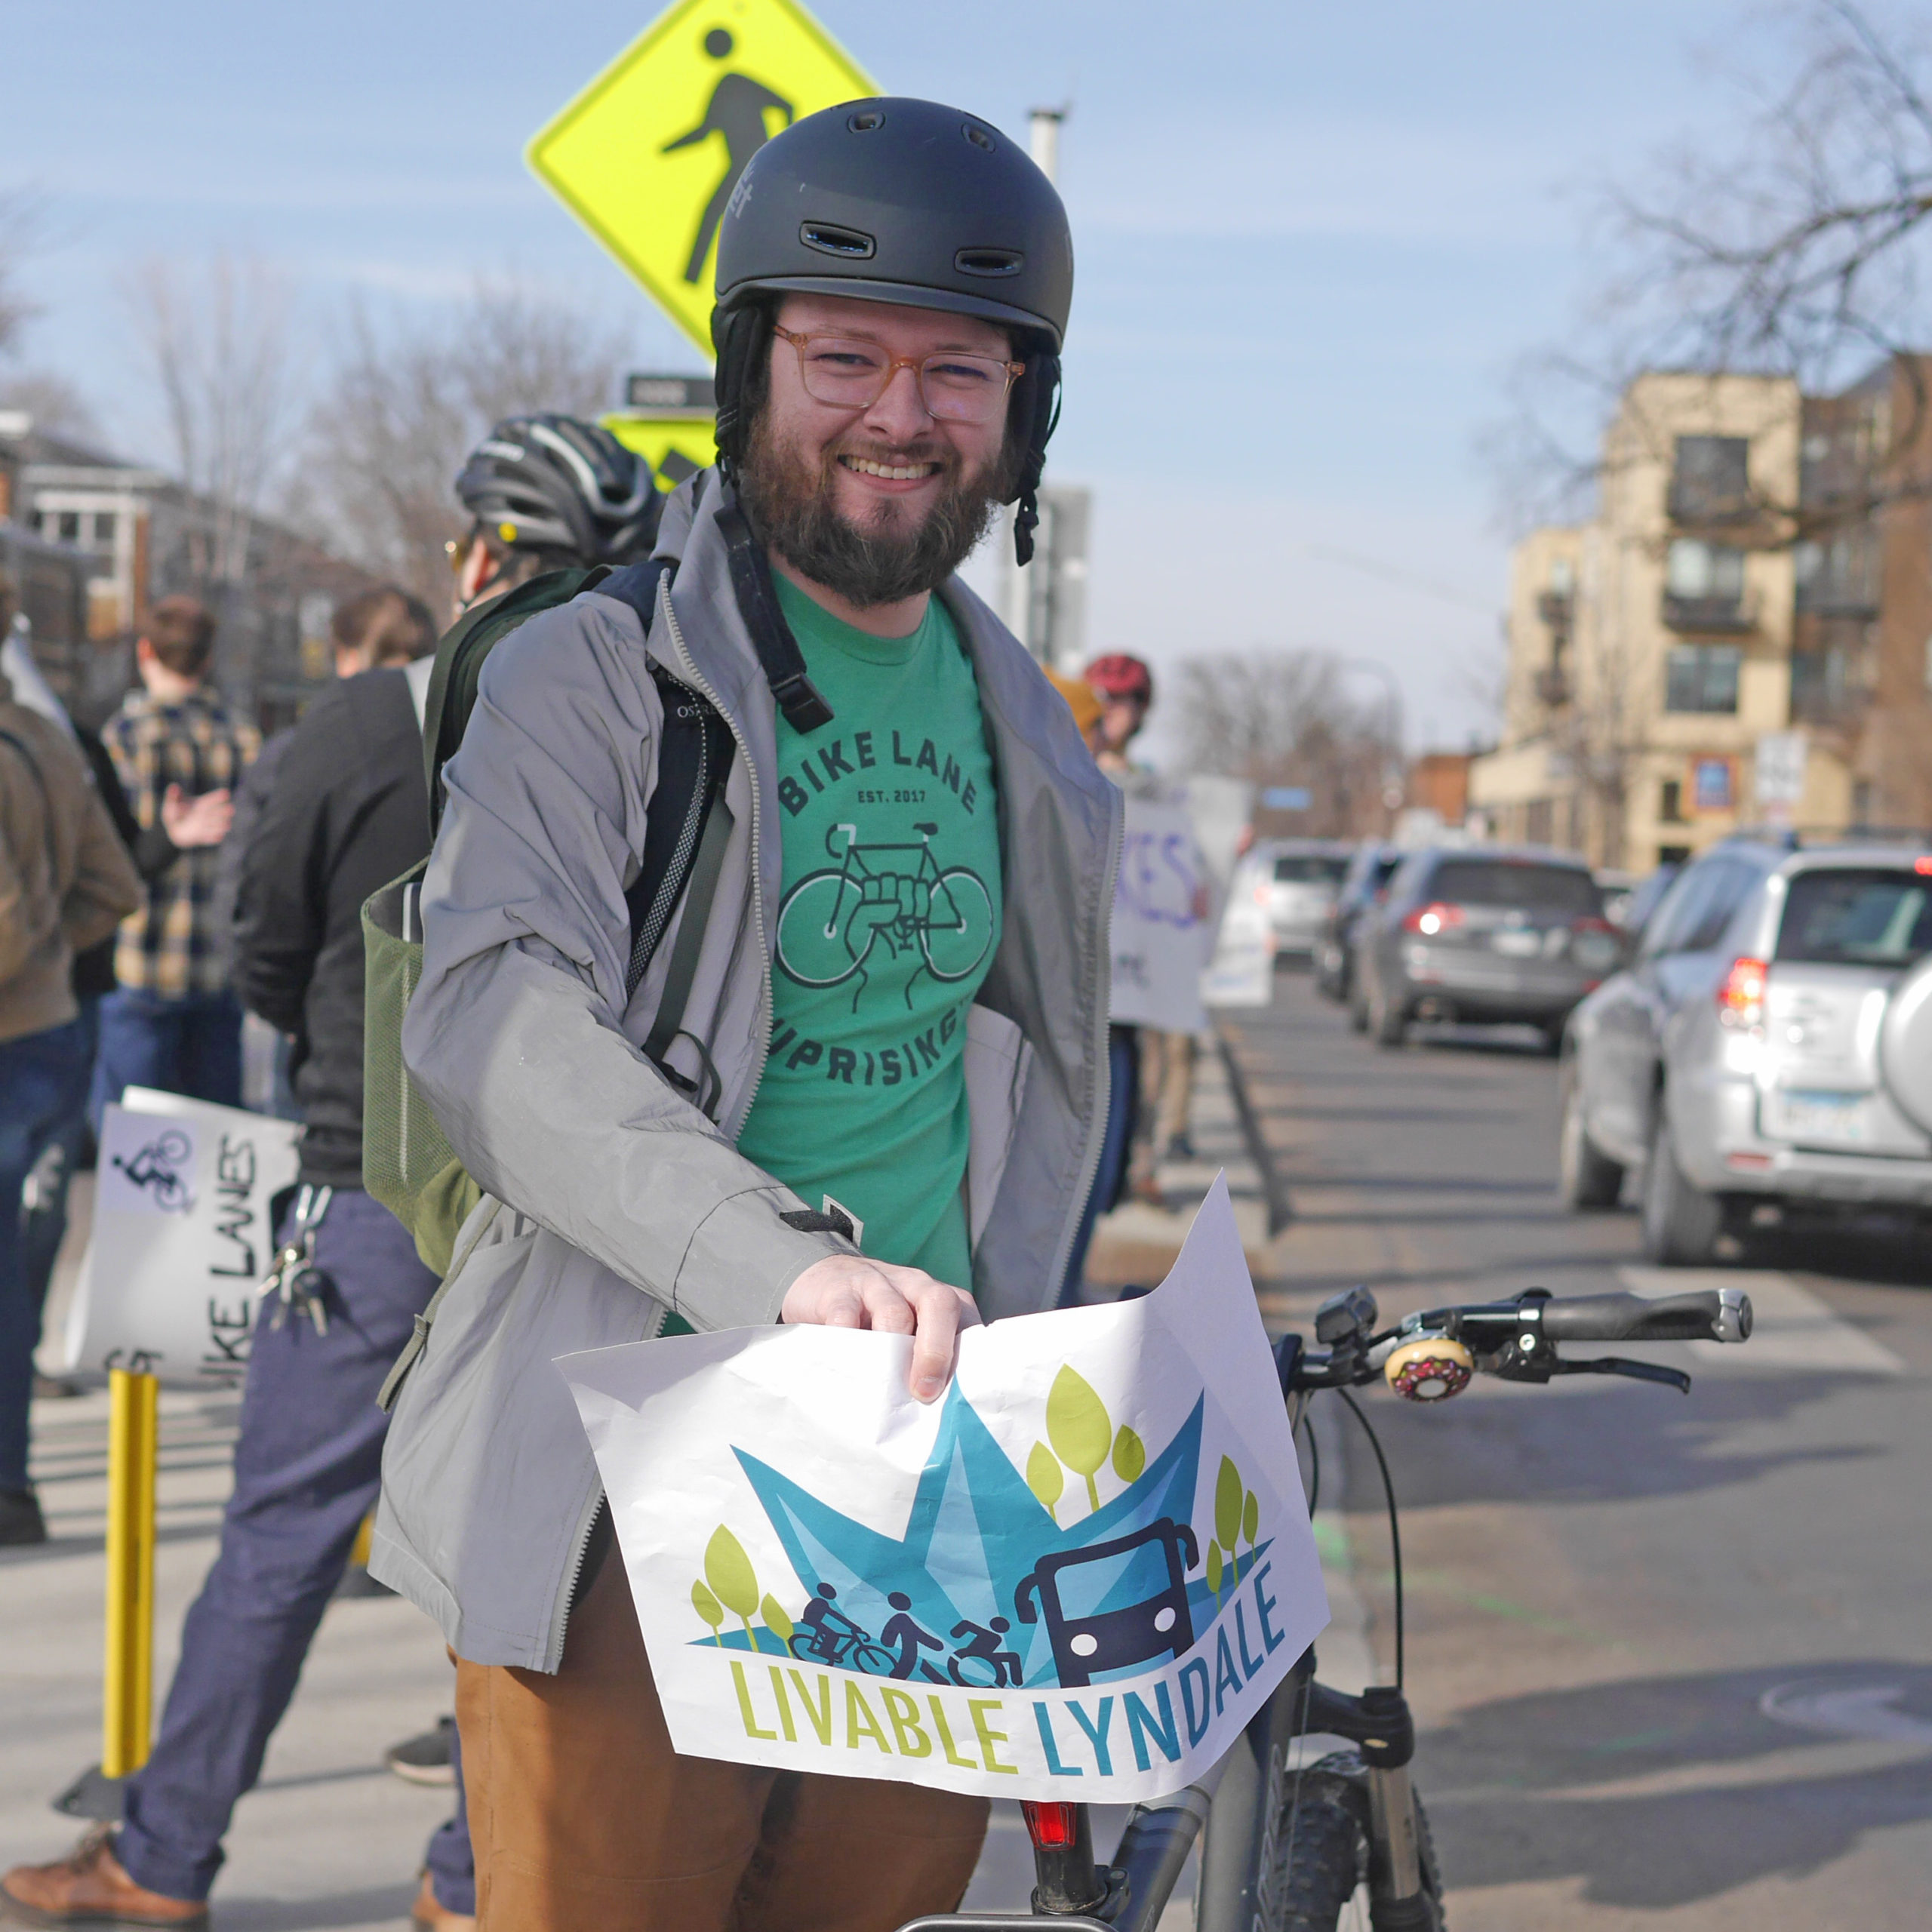 A community member wearing a black helmet and holding a Livable Lyndale sign on the back of his bike at the rally at 27th and Lyndale 